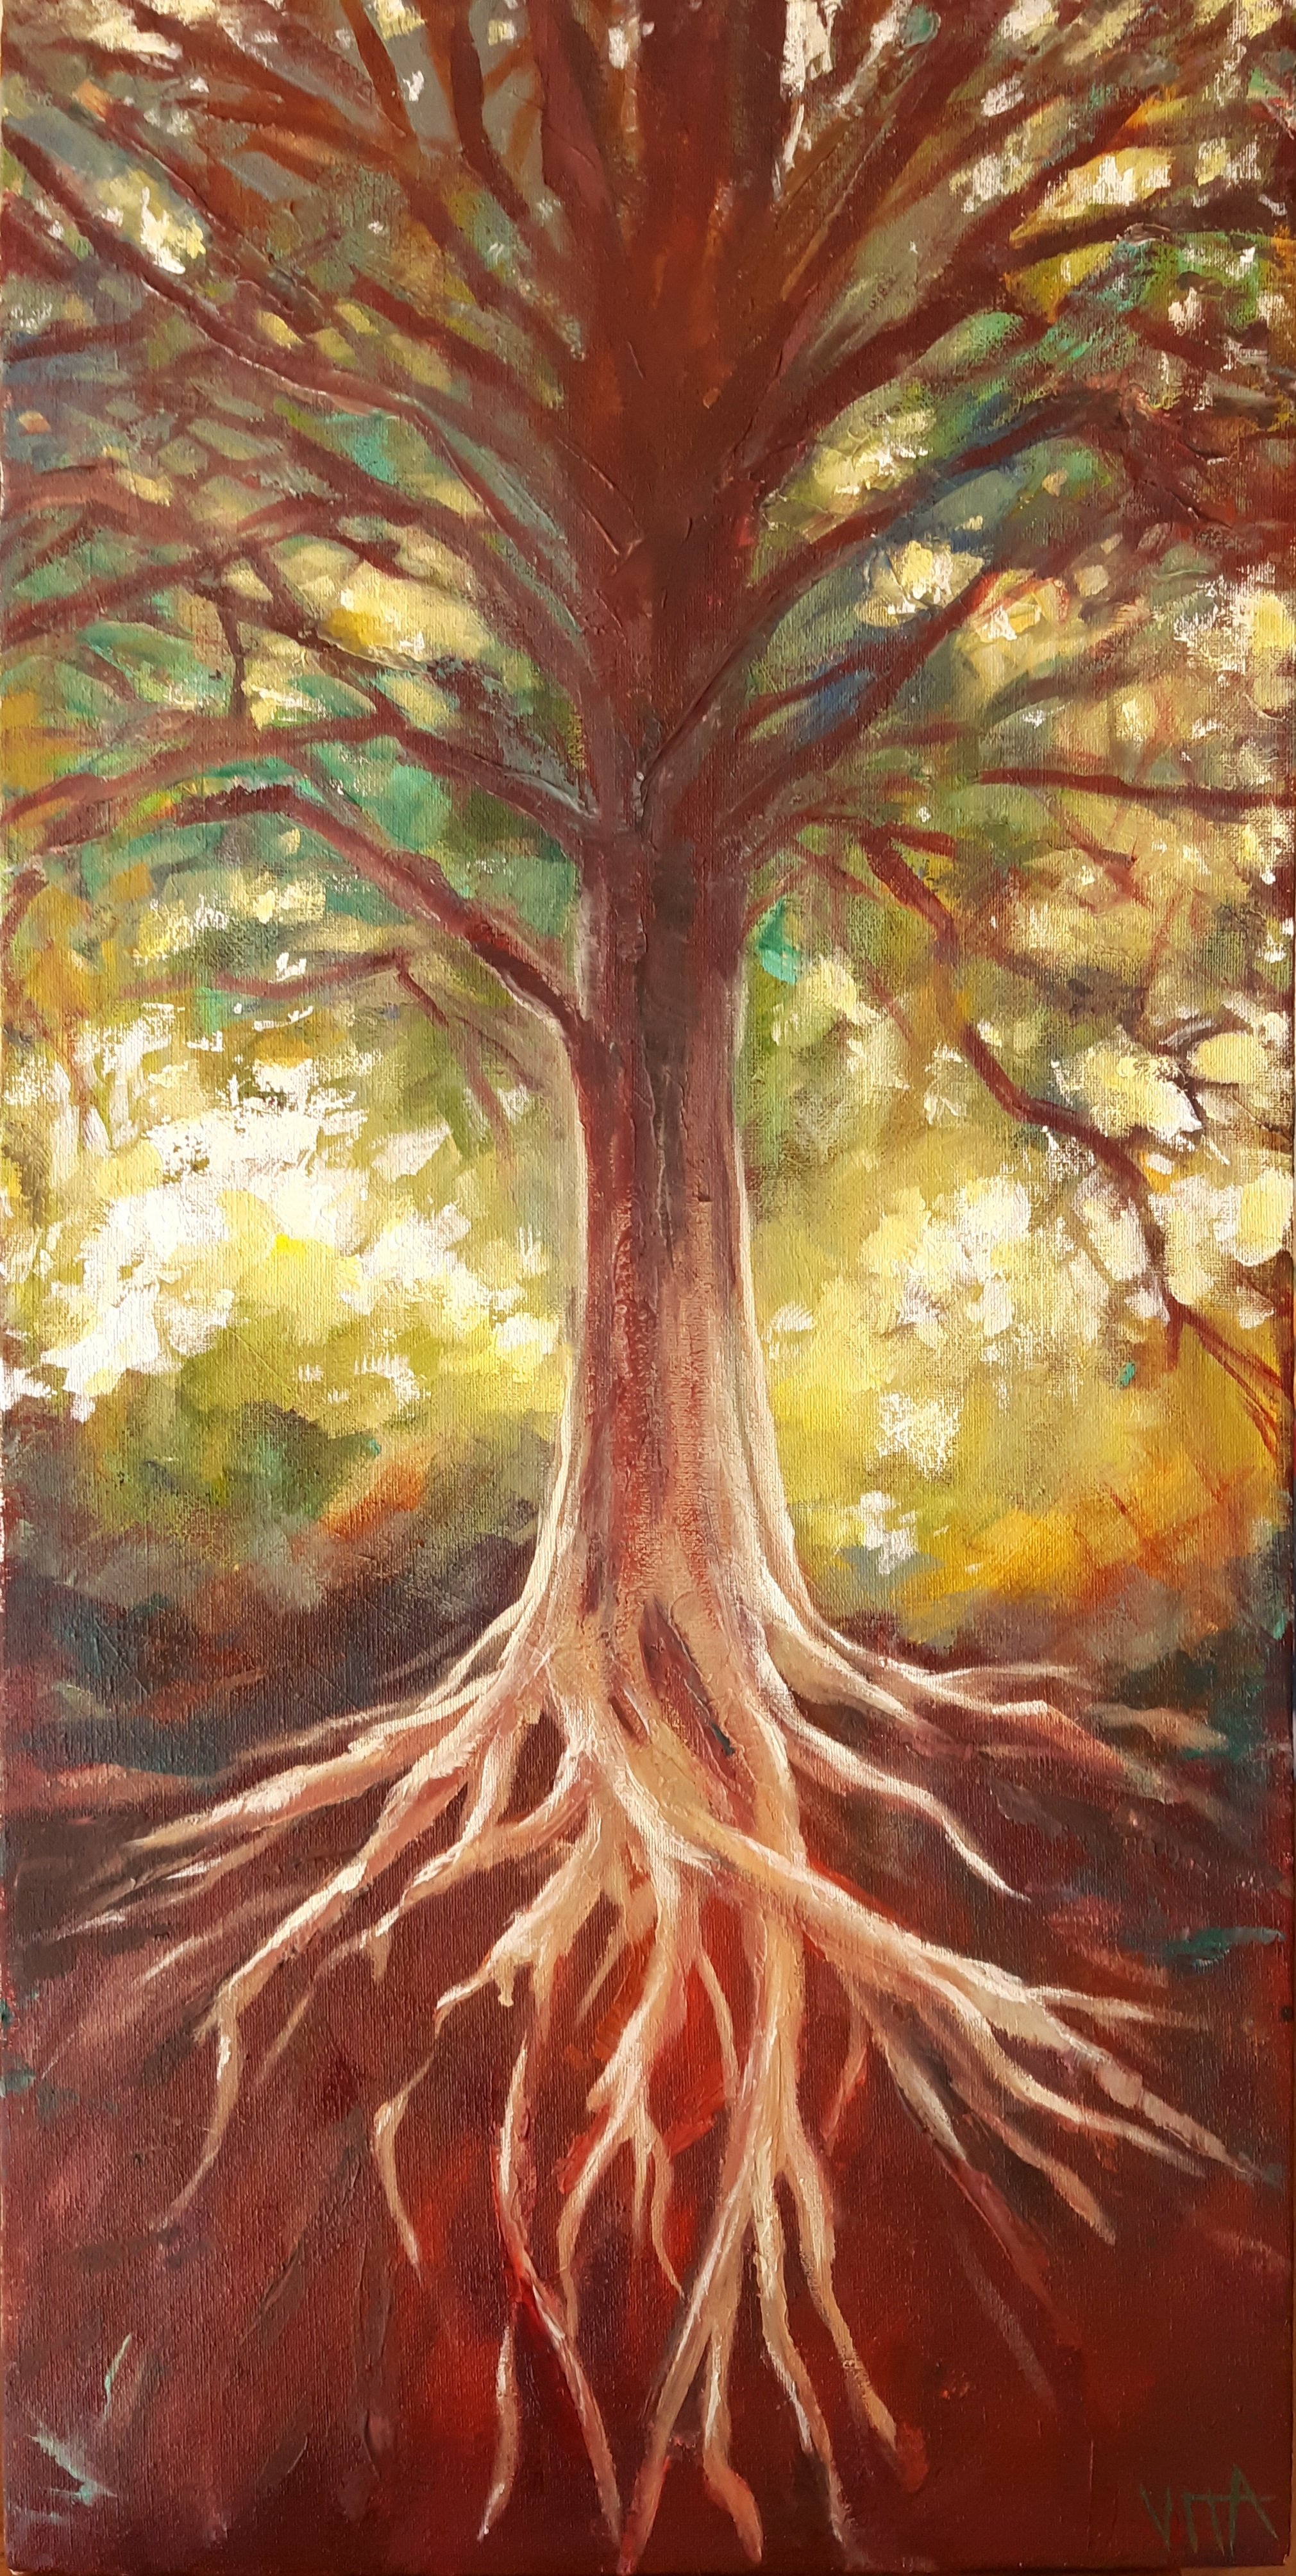 SOLD, Roots Painting, Acrylic on Canvas, Copyright 2021 Hirschten